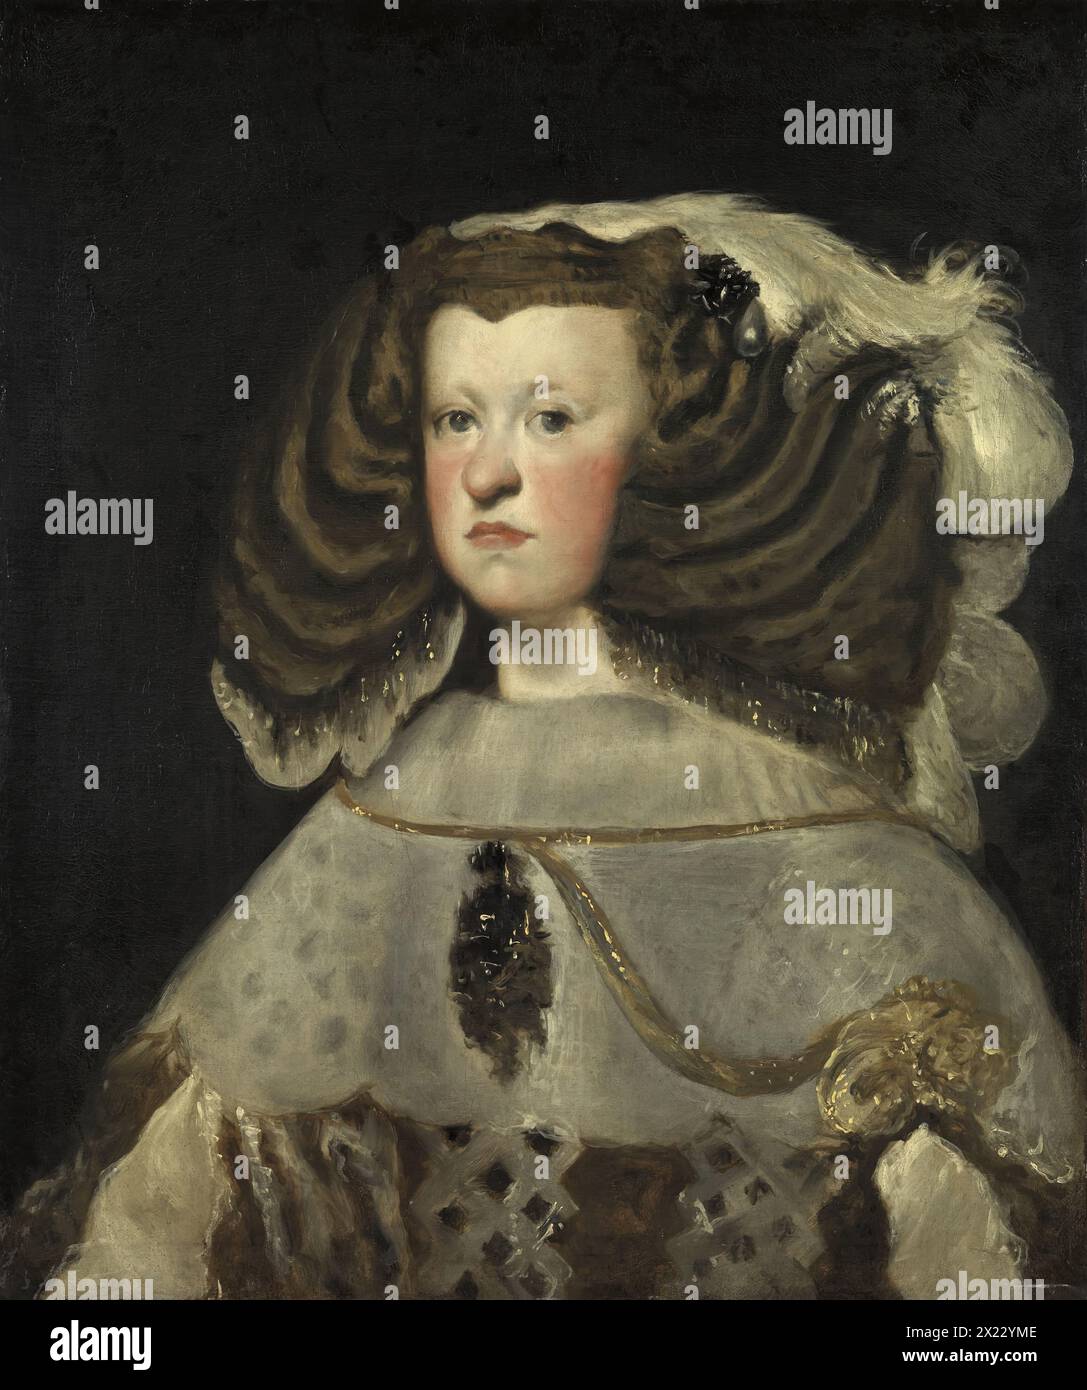 Portrait of Mariana of Austria, Queen of Spain, 1655. Mariana of Austria, daughter of the Emperor Ferdinand III and Mary of Hungary, was born in Vienna in 1634. Intended as the wife of her cousin, Prince Baltasar Carlos, who died in 1646, she then married his uncle Philip IV of Spain. The issue of this marriage was the Infanta Margarita, Prince Felipe Pr&#xf3;spero and Prince Charles, the future Charles II. Stock Photo